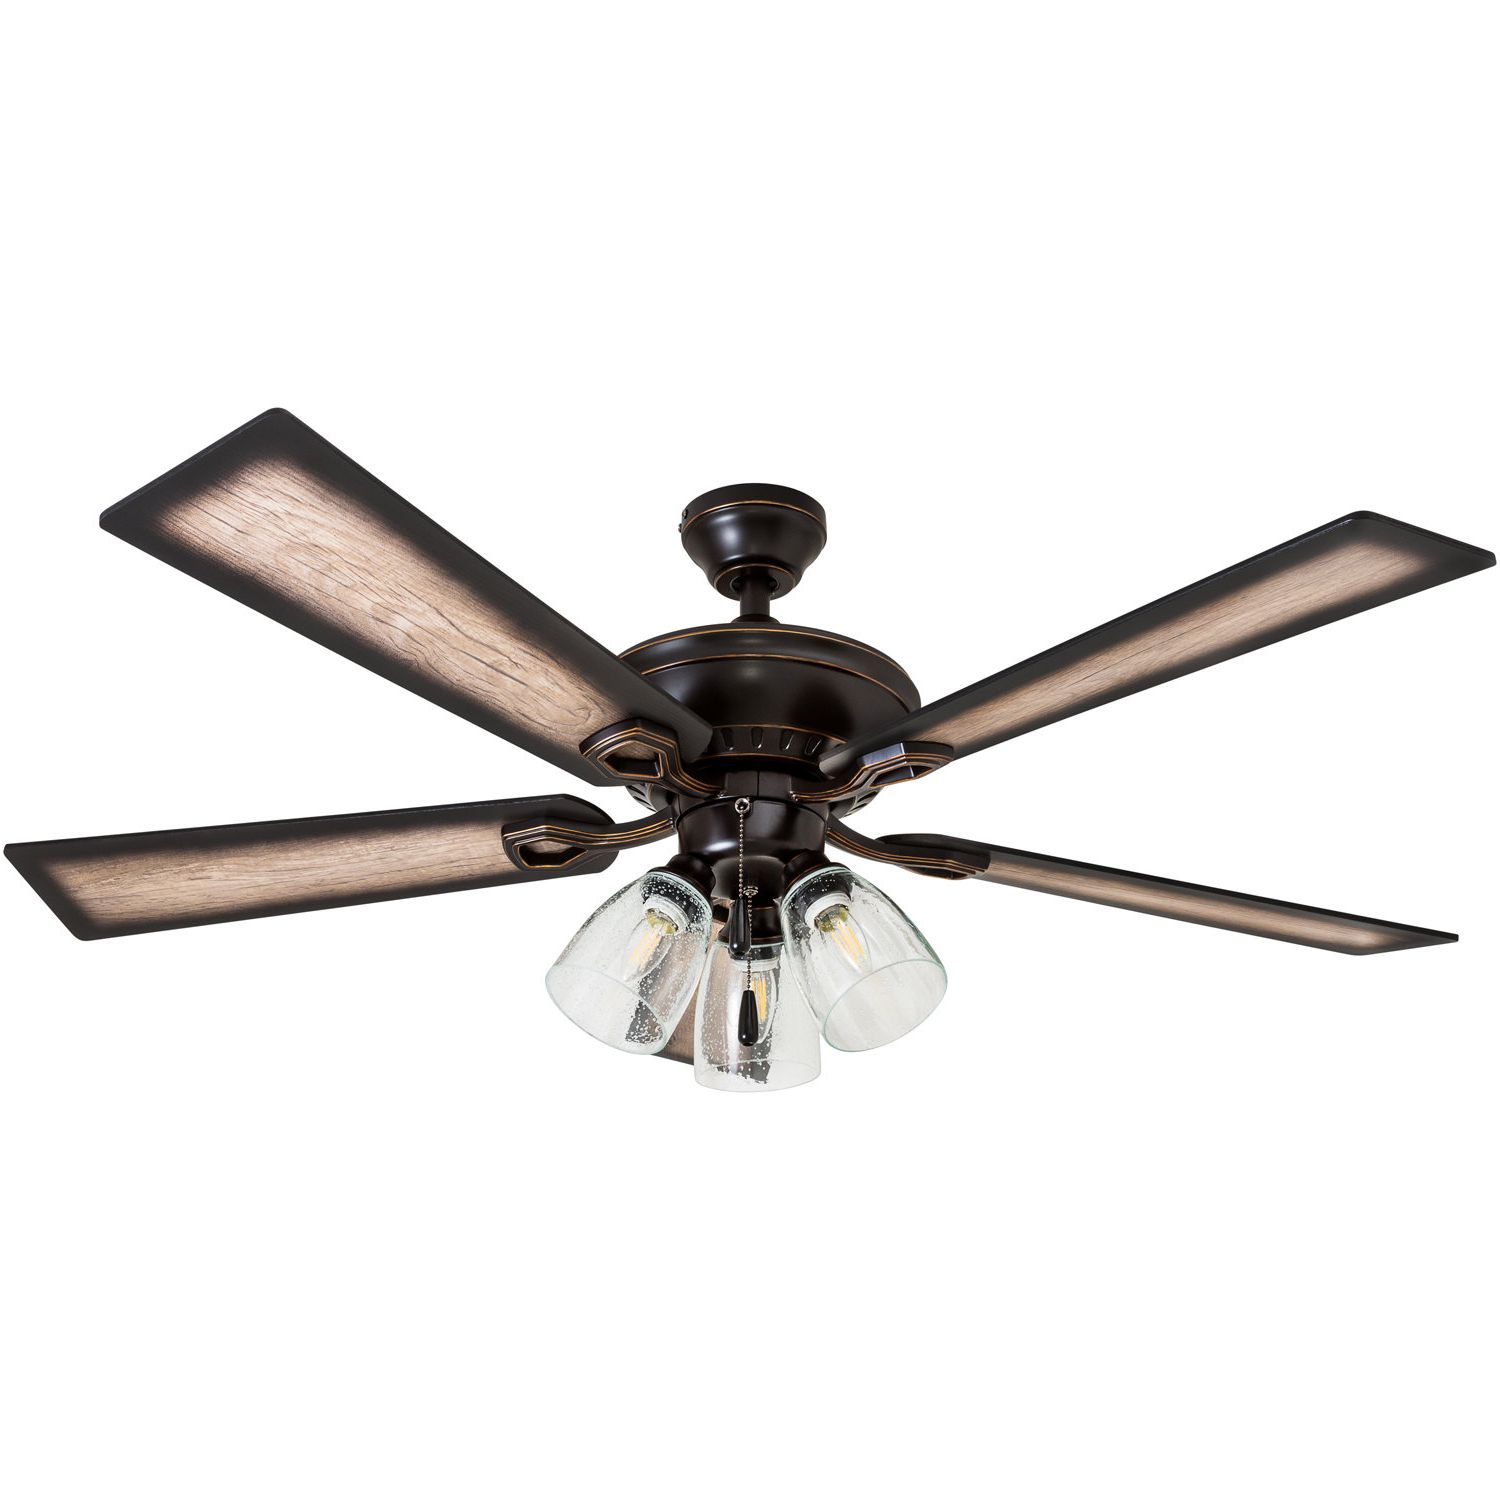 Famous Ratcliffe 5 Blade Led Ceiling Fans Within 52" O'hanlon 5 Blade Led Ceiling Fan, Light Kit Included (View 3 of 20)